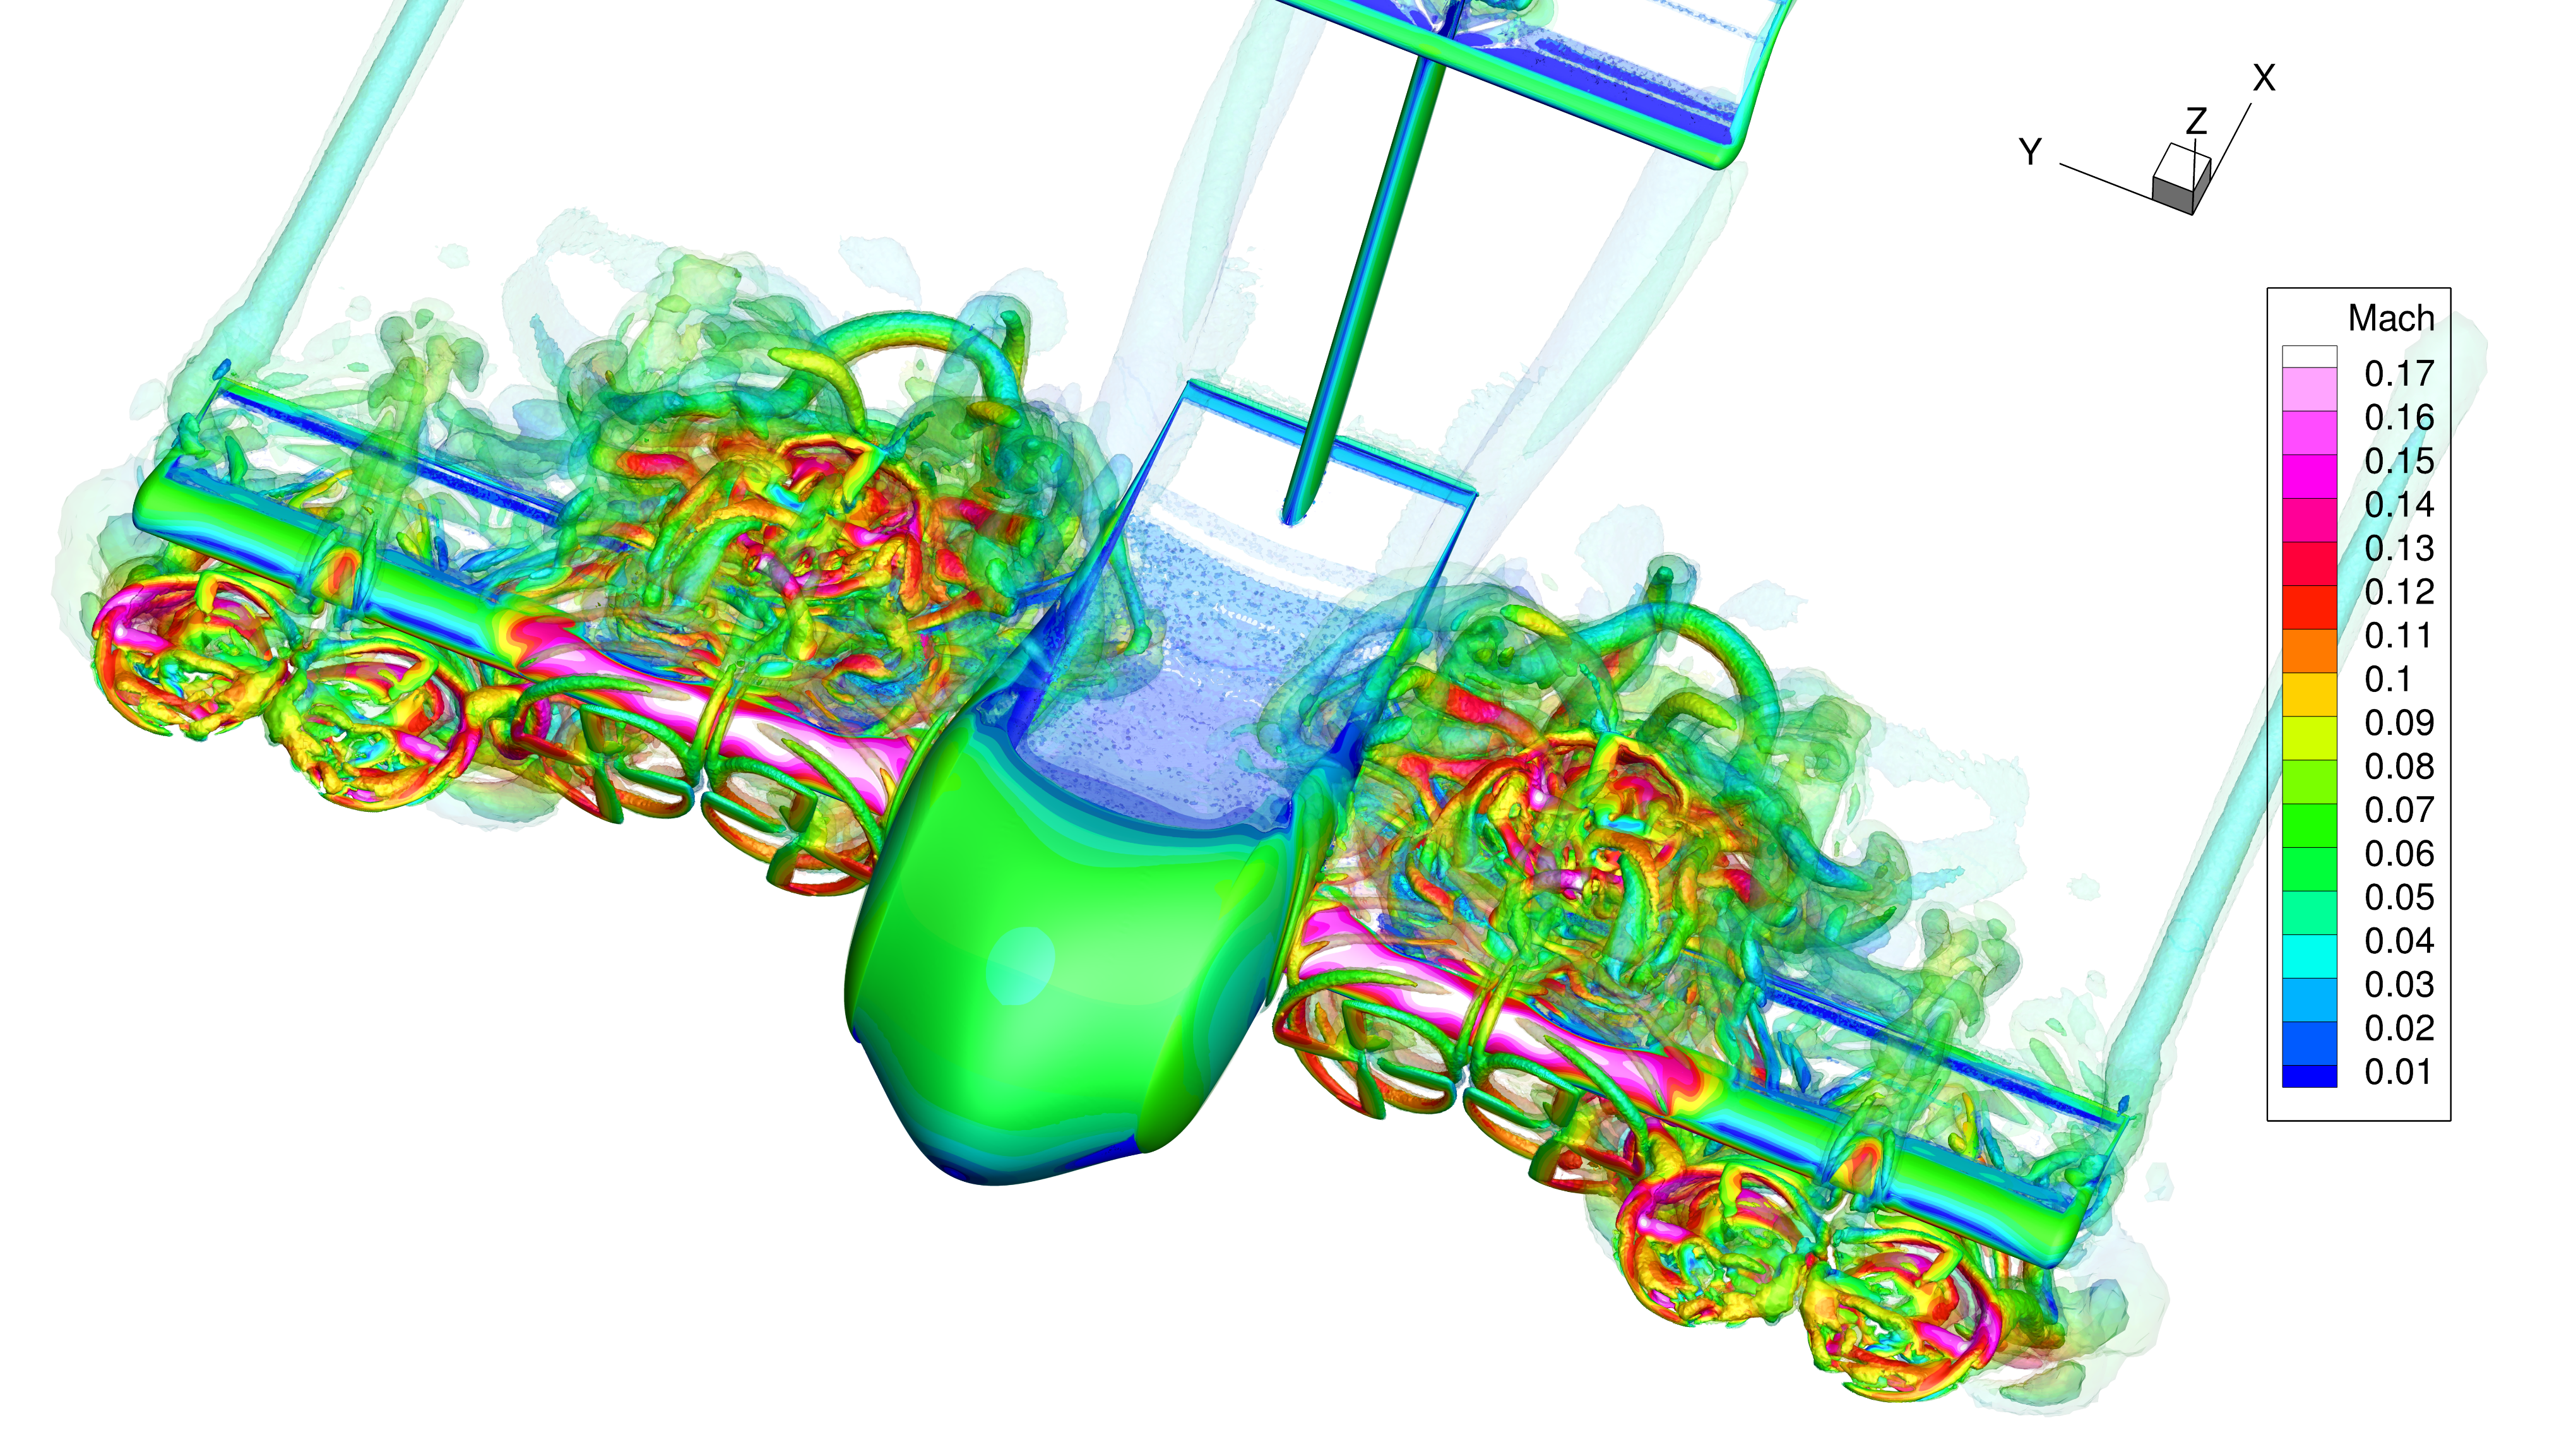 Flow360 CFD simulation software mesh modeling by Flexcompute.